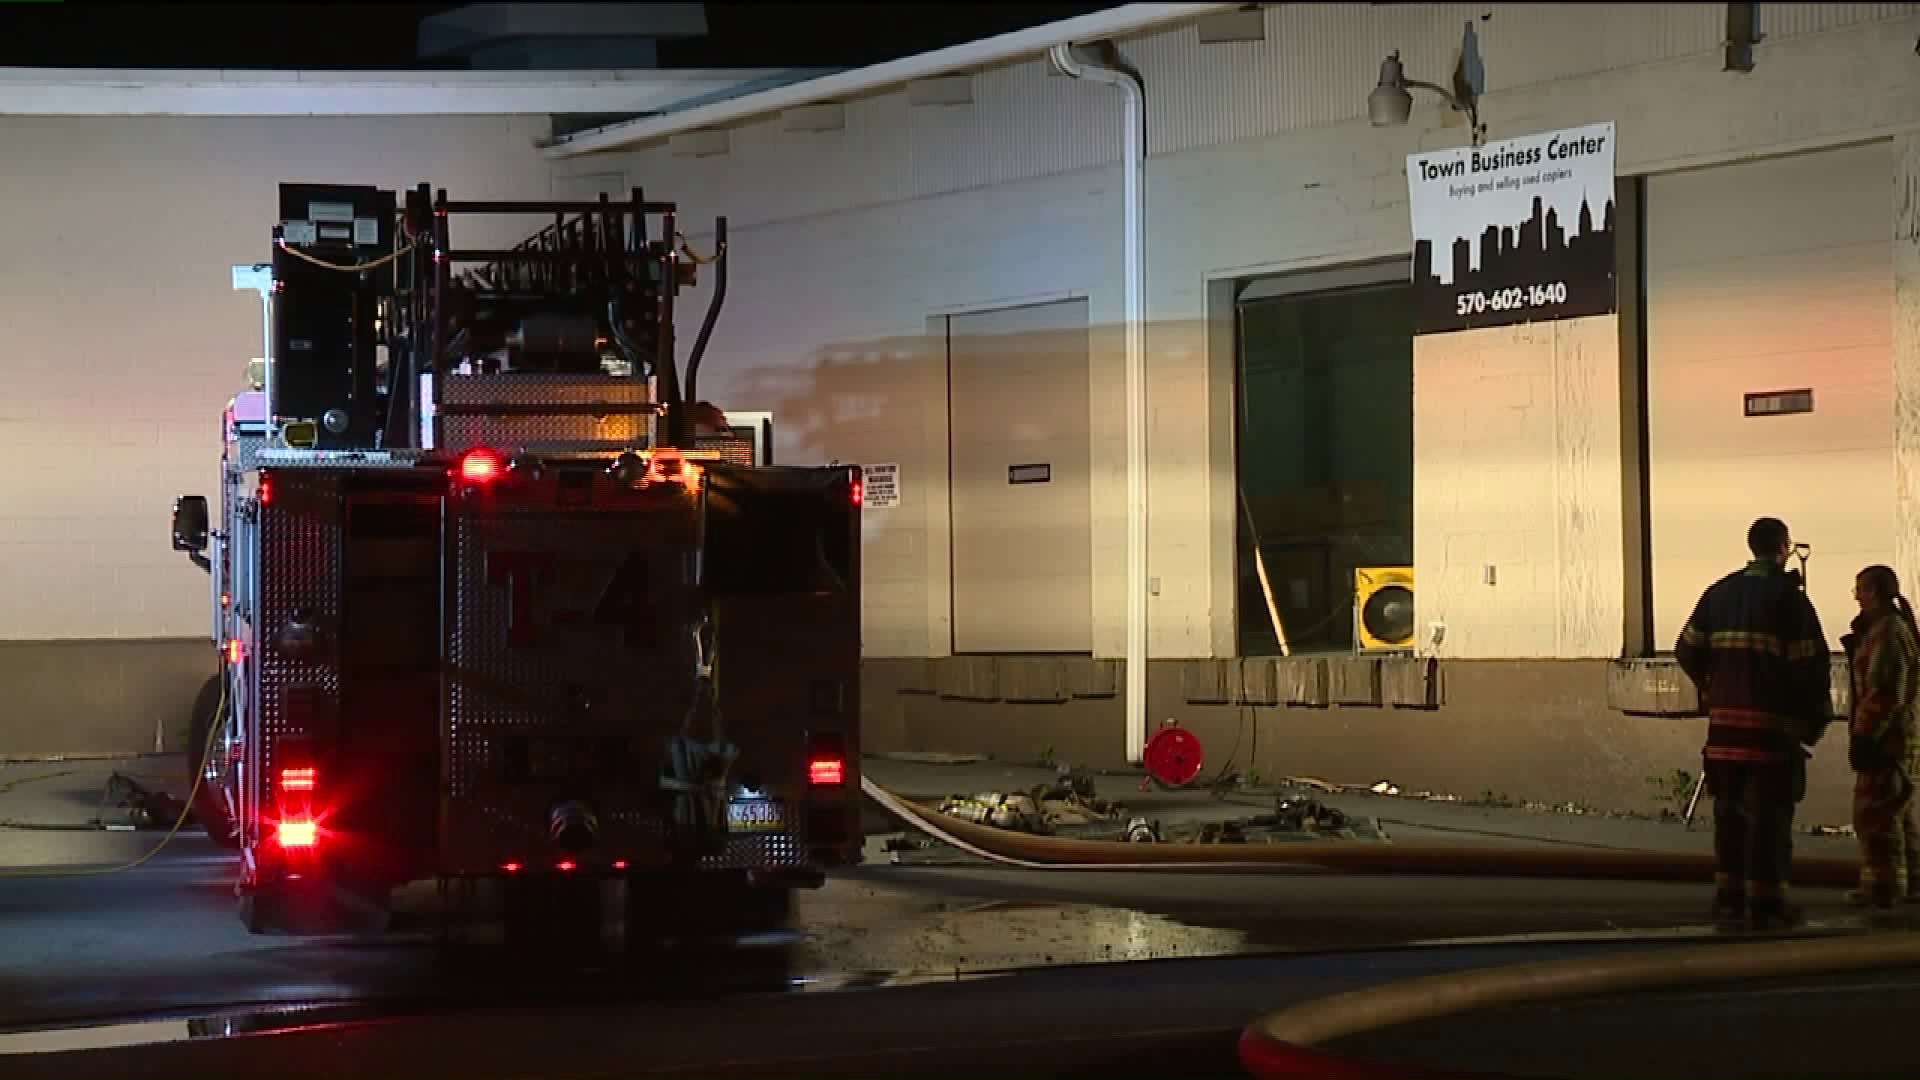 Business Damaged by Fire in Luzerne County